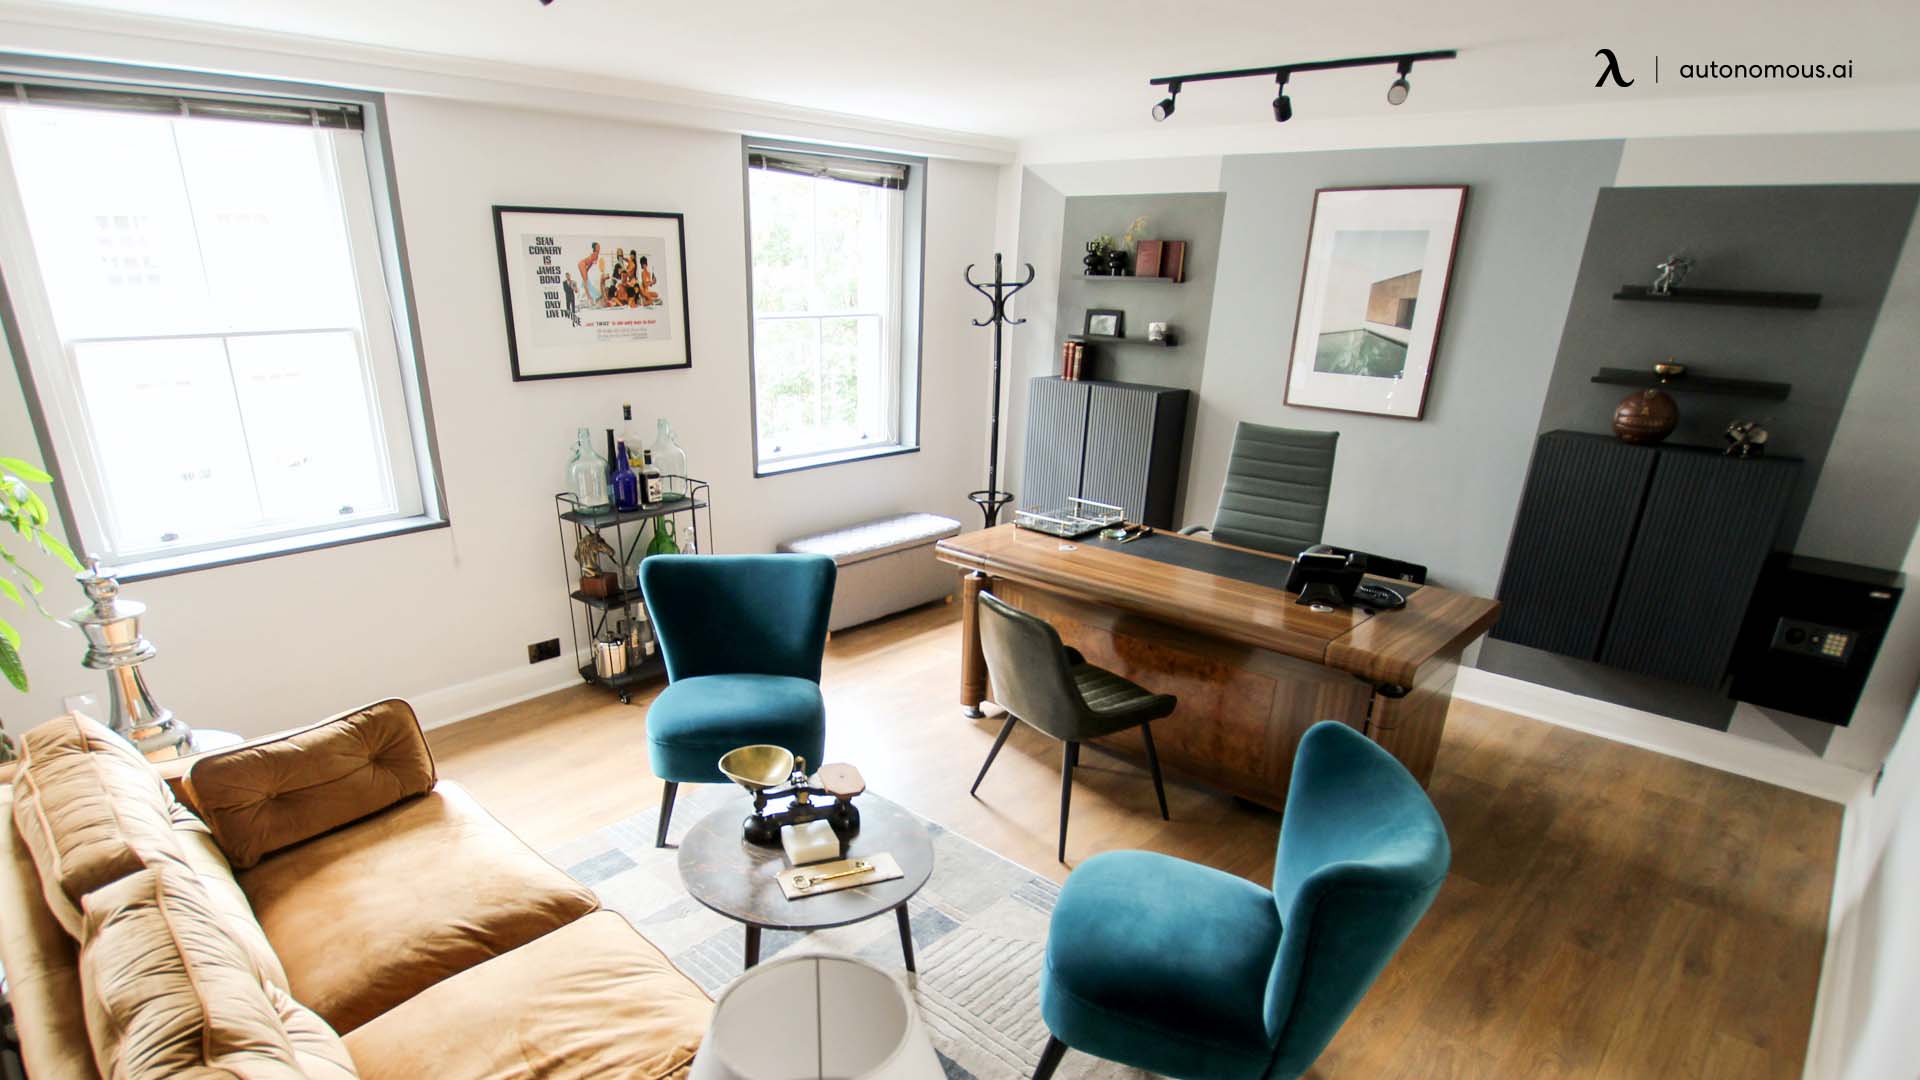 10 Home Office Design Trends in 2022